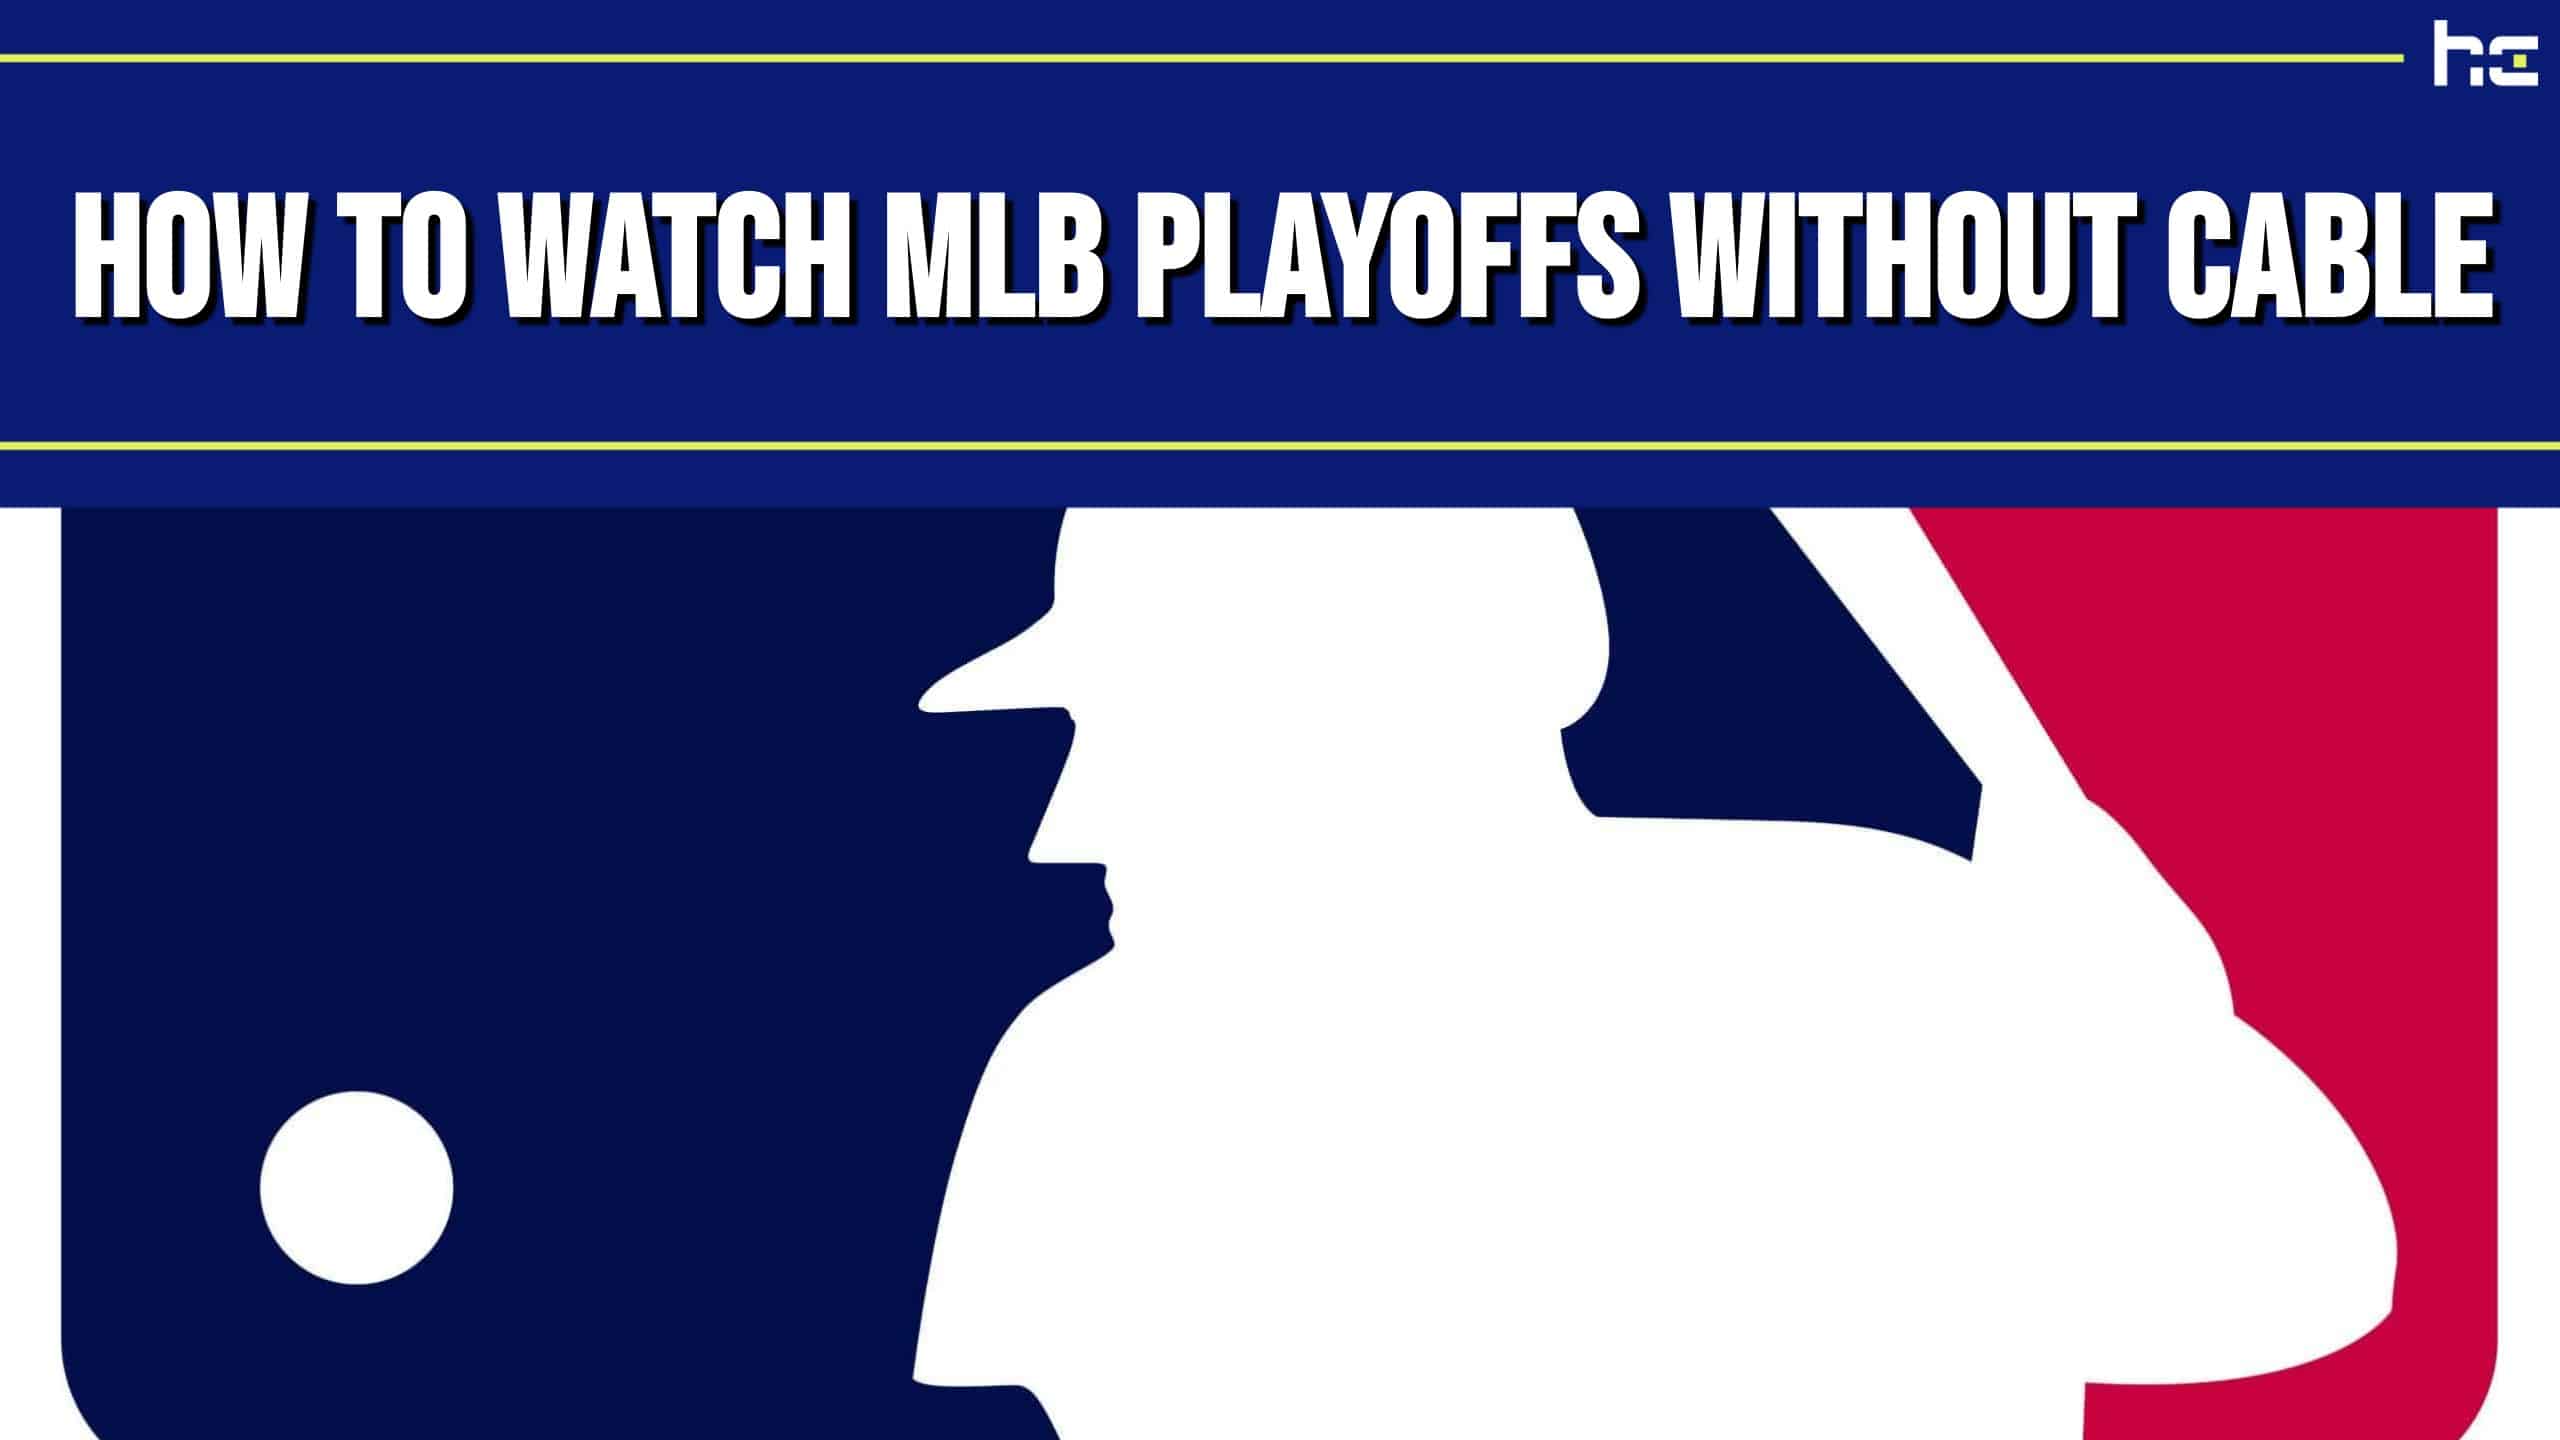 How to Watch MLB Playoffs Without Cable